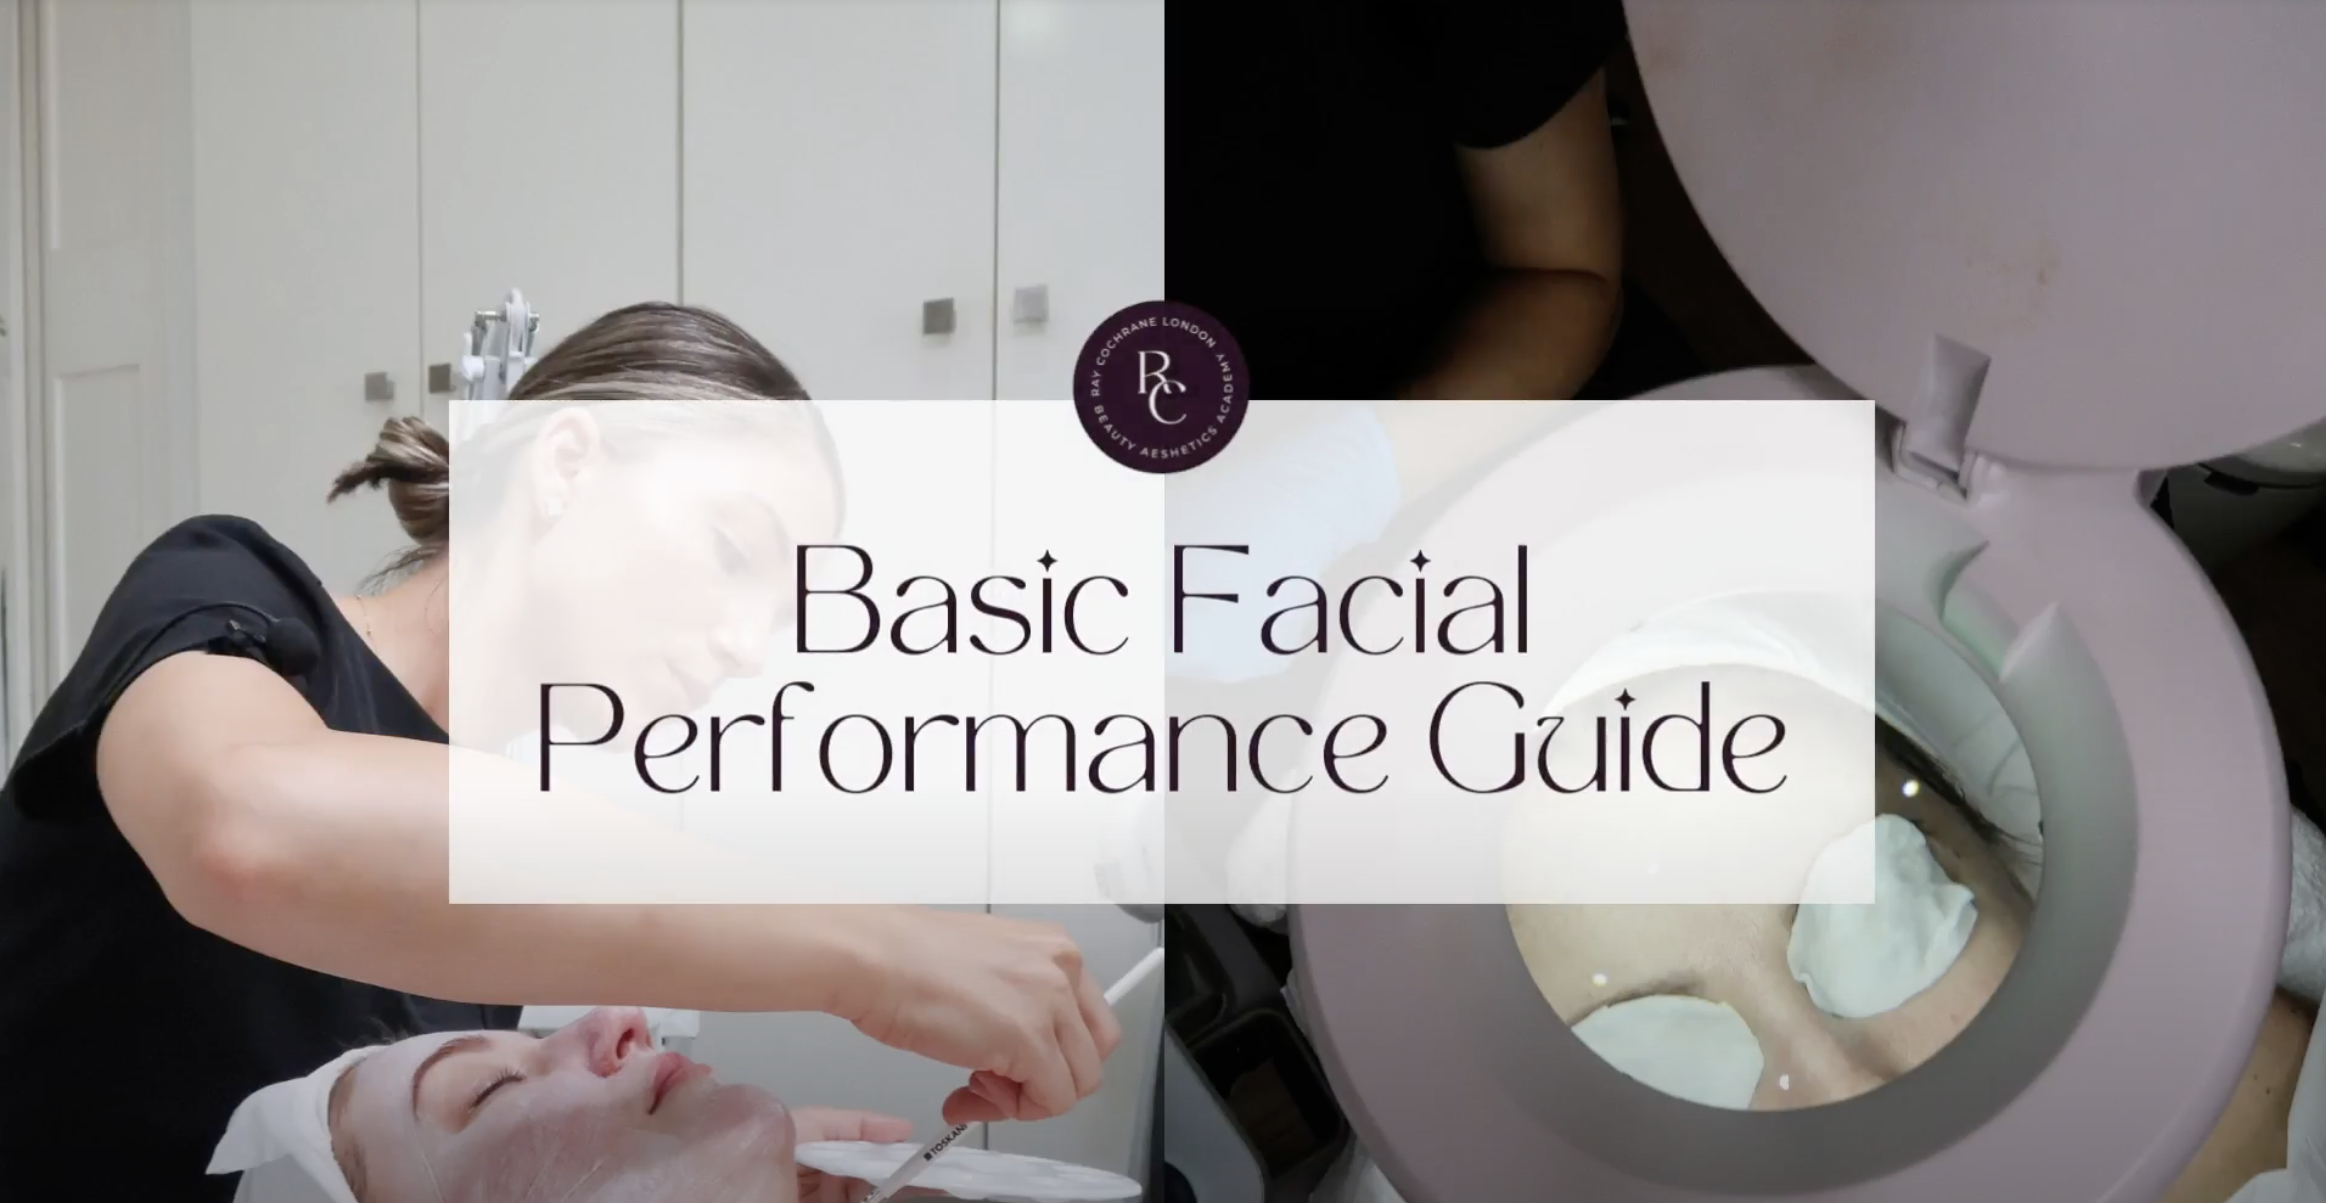 https://www.raycochrane.co.uk/wp-content/uploads/2022/10/Basic-facial-performance-guide.png